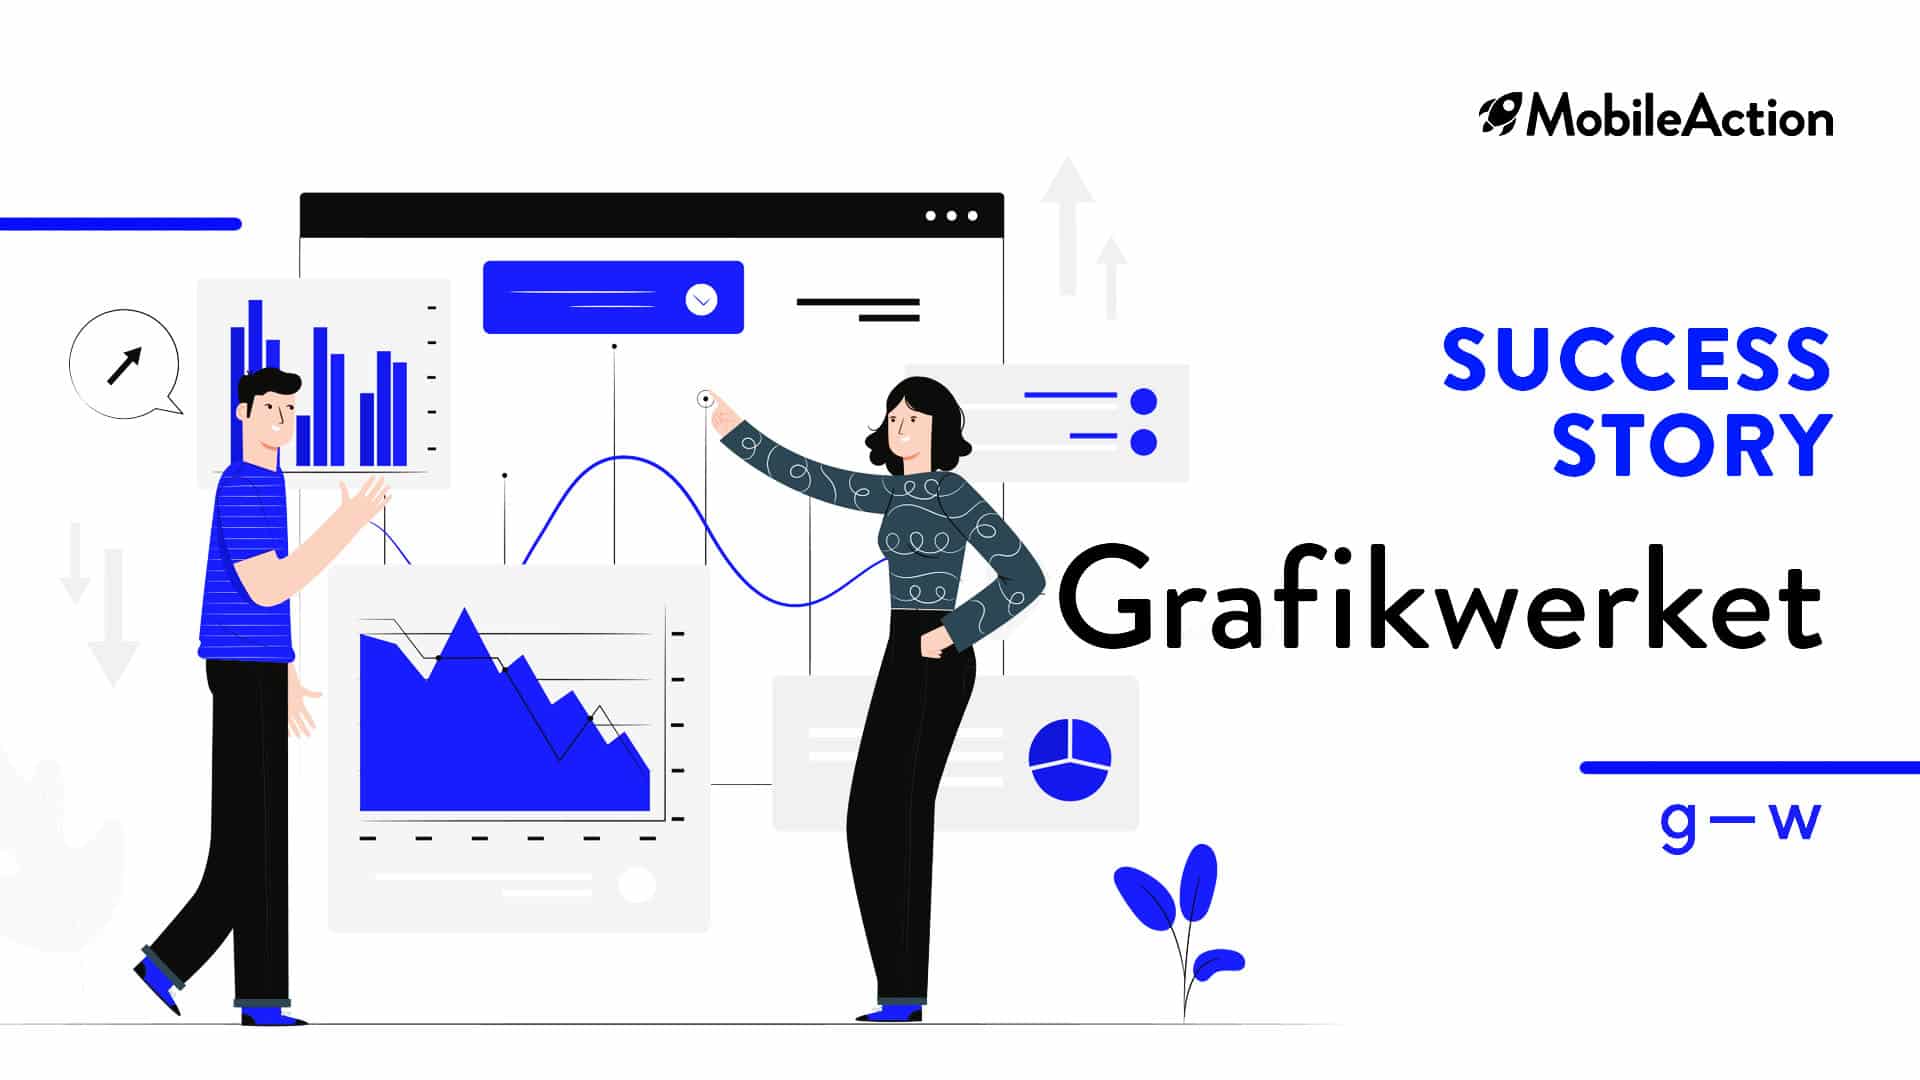 How Grafikwerket Increased Downloads by 1800% with MobileAction